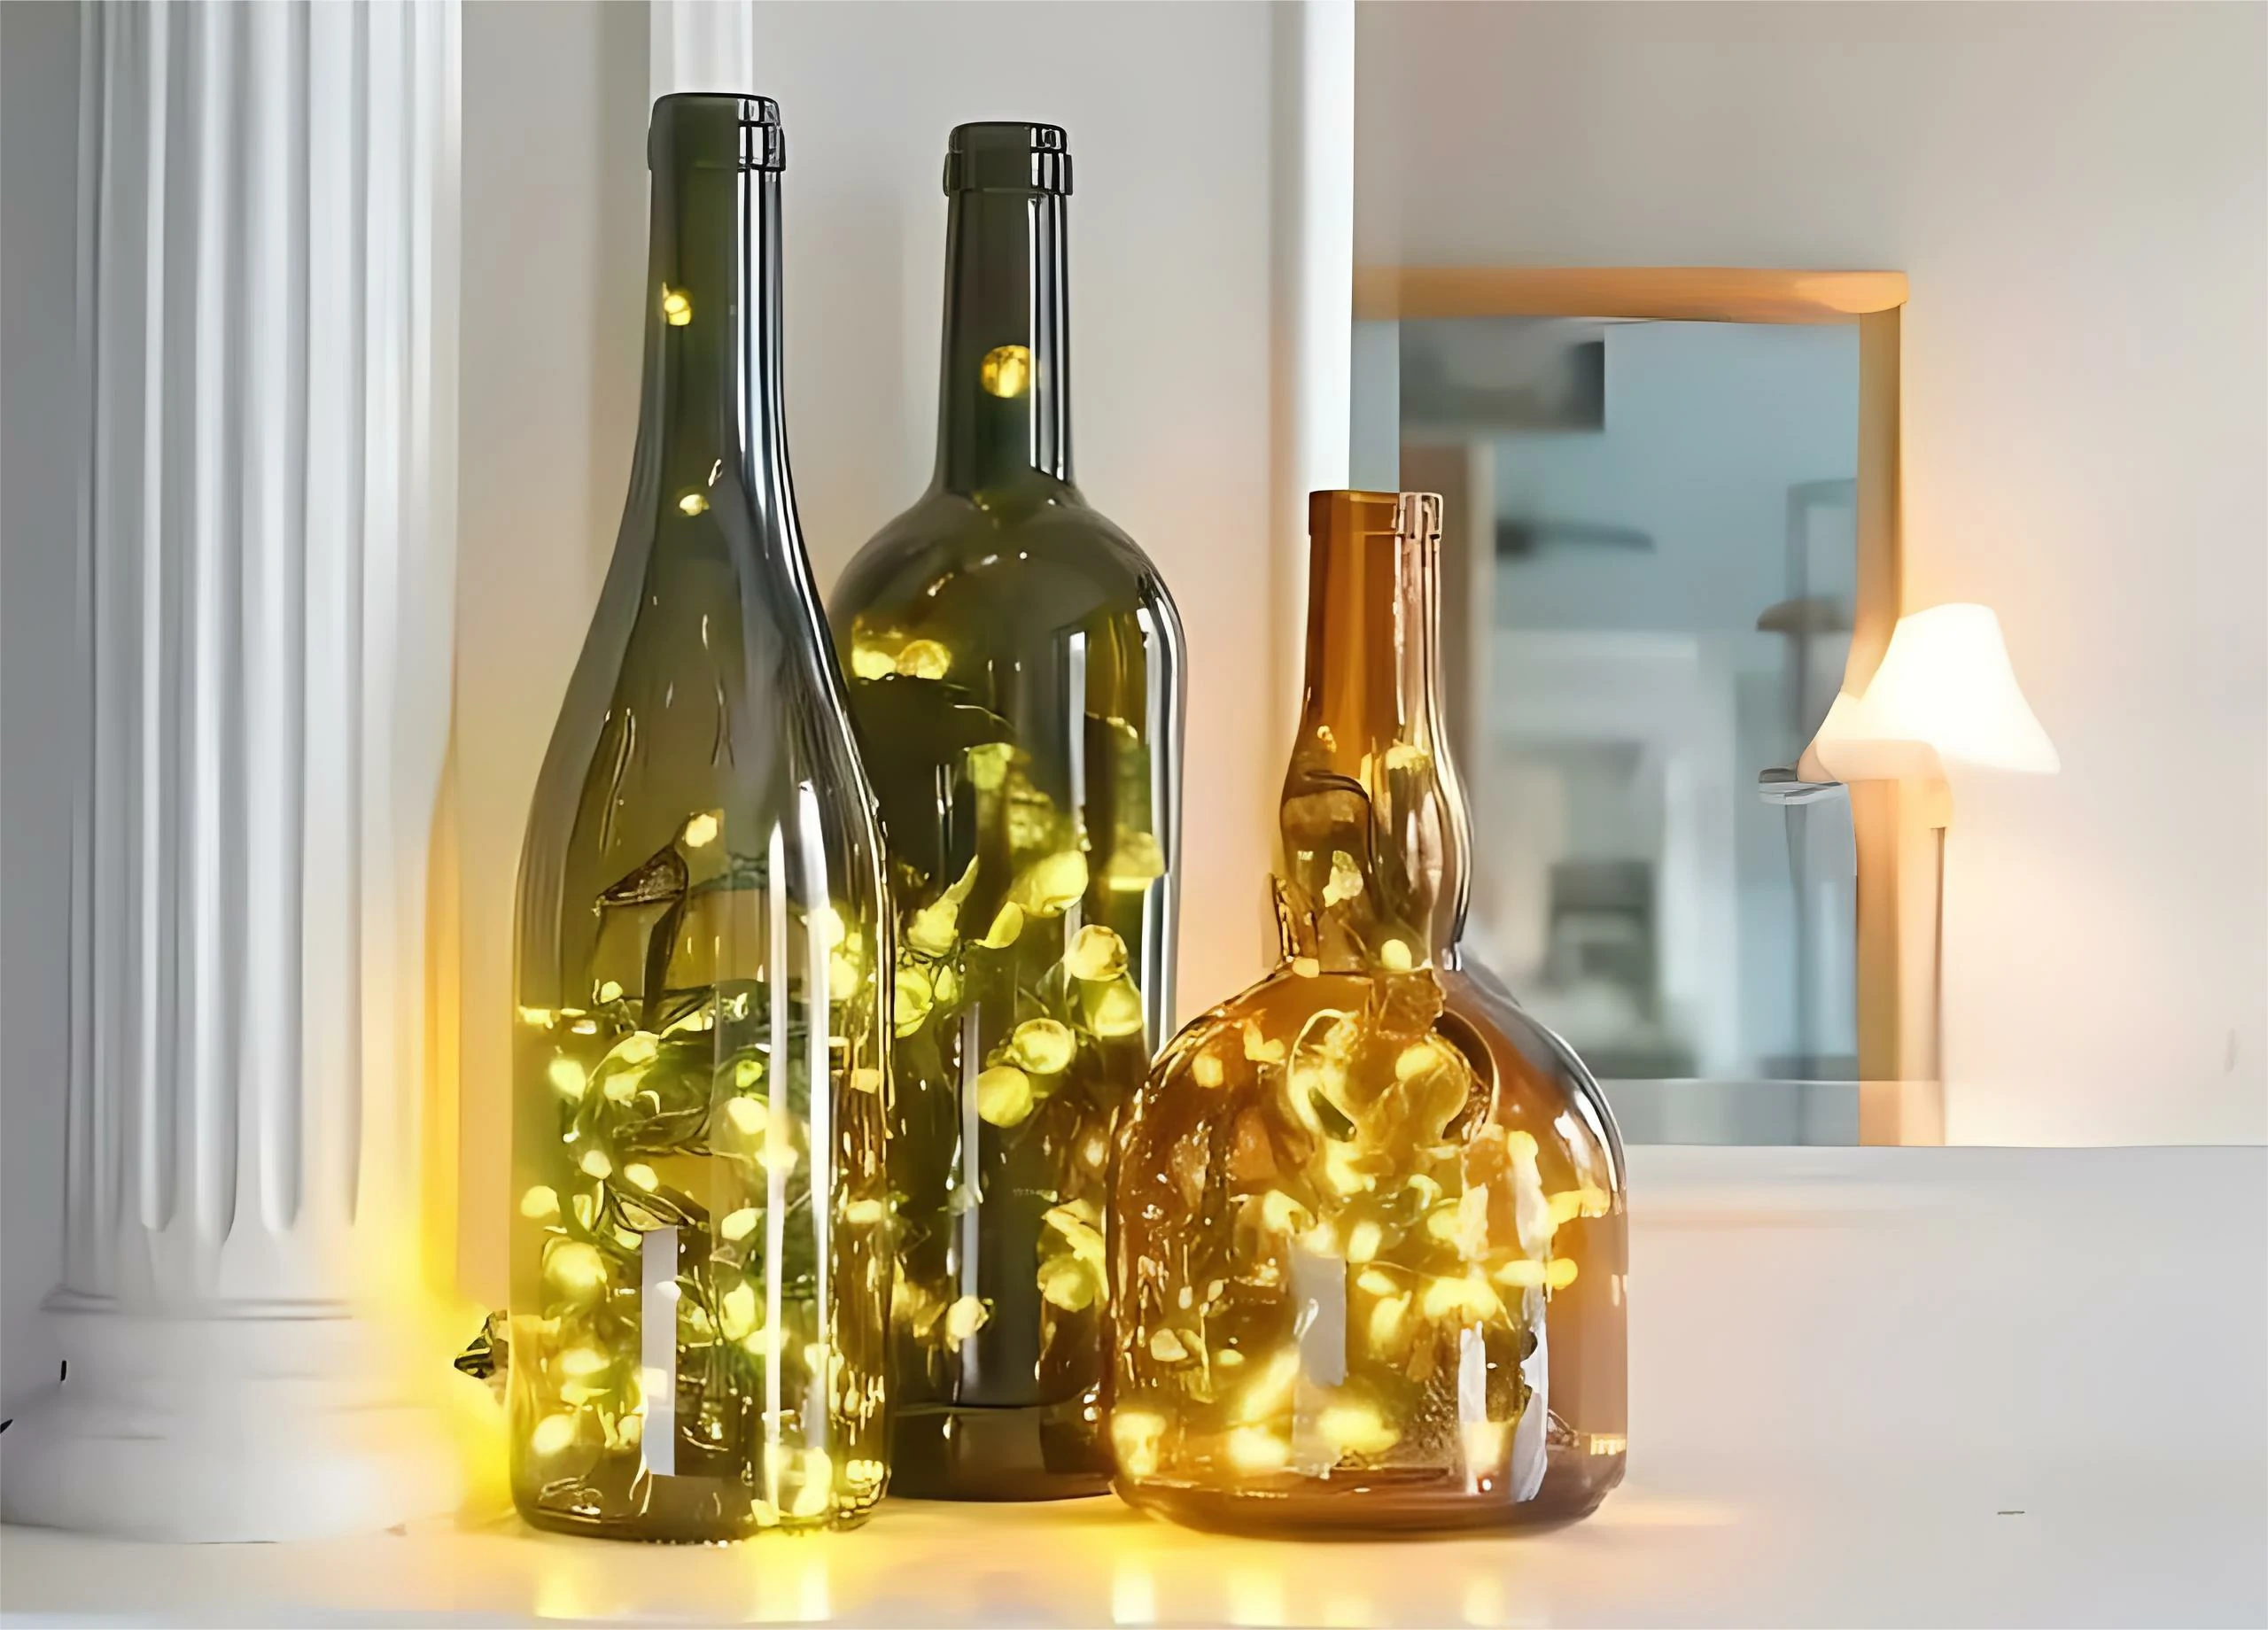 Using glass bottles as decor is also a stylish way of embracing the upcycle trend.